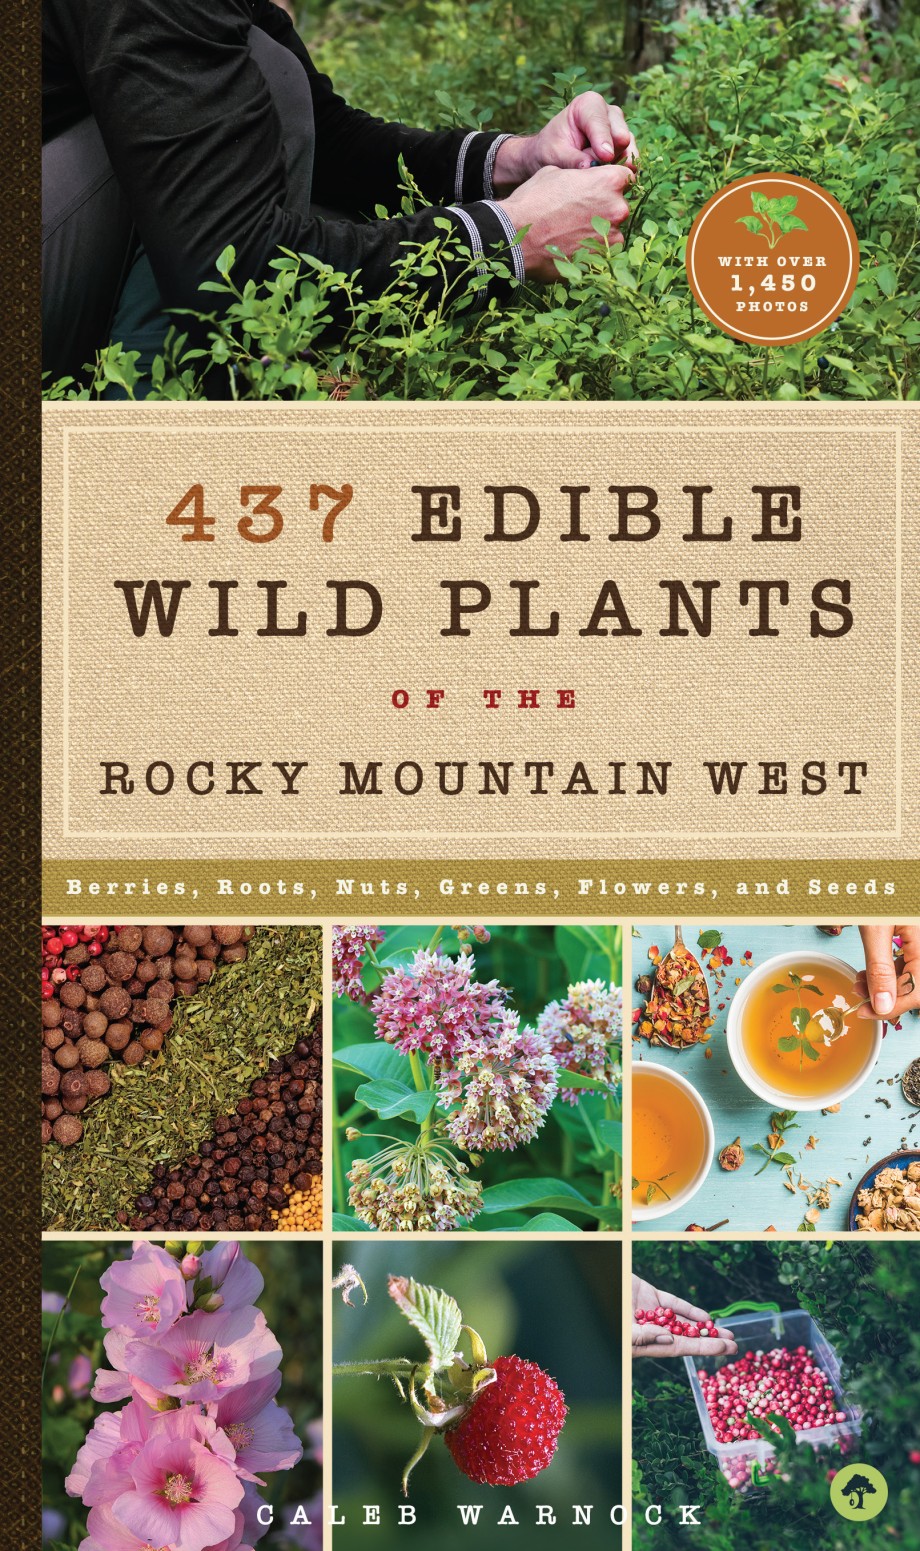 437 Edible Wild Plants of the Rocky Mountain West Berries, Roots, Nuts, Greens, Flowers, and Seeds